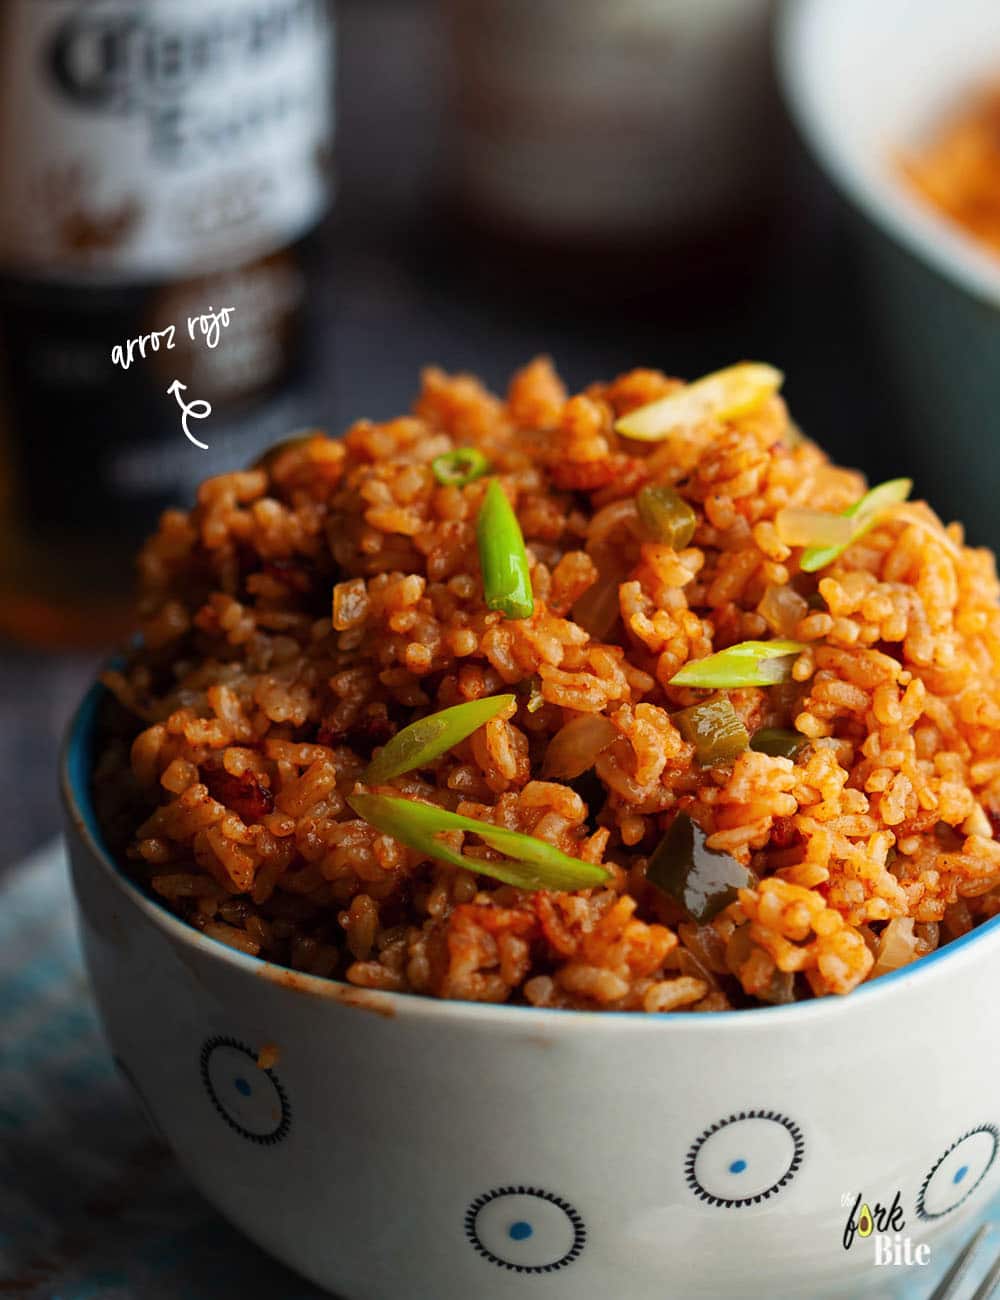 Here’s the right way to make Arroz Rojo in your kitchen. The rice is not only soft and fluffy but is not sticky and has the perfect chew.